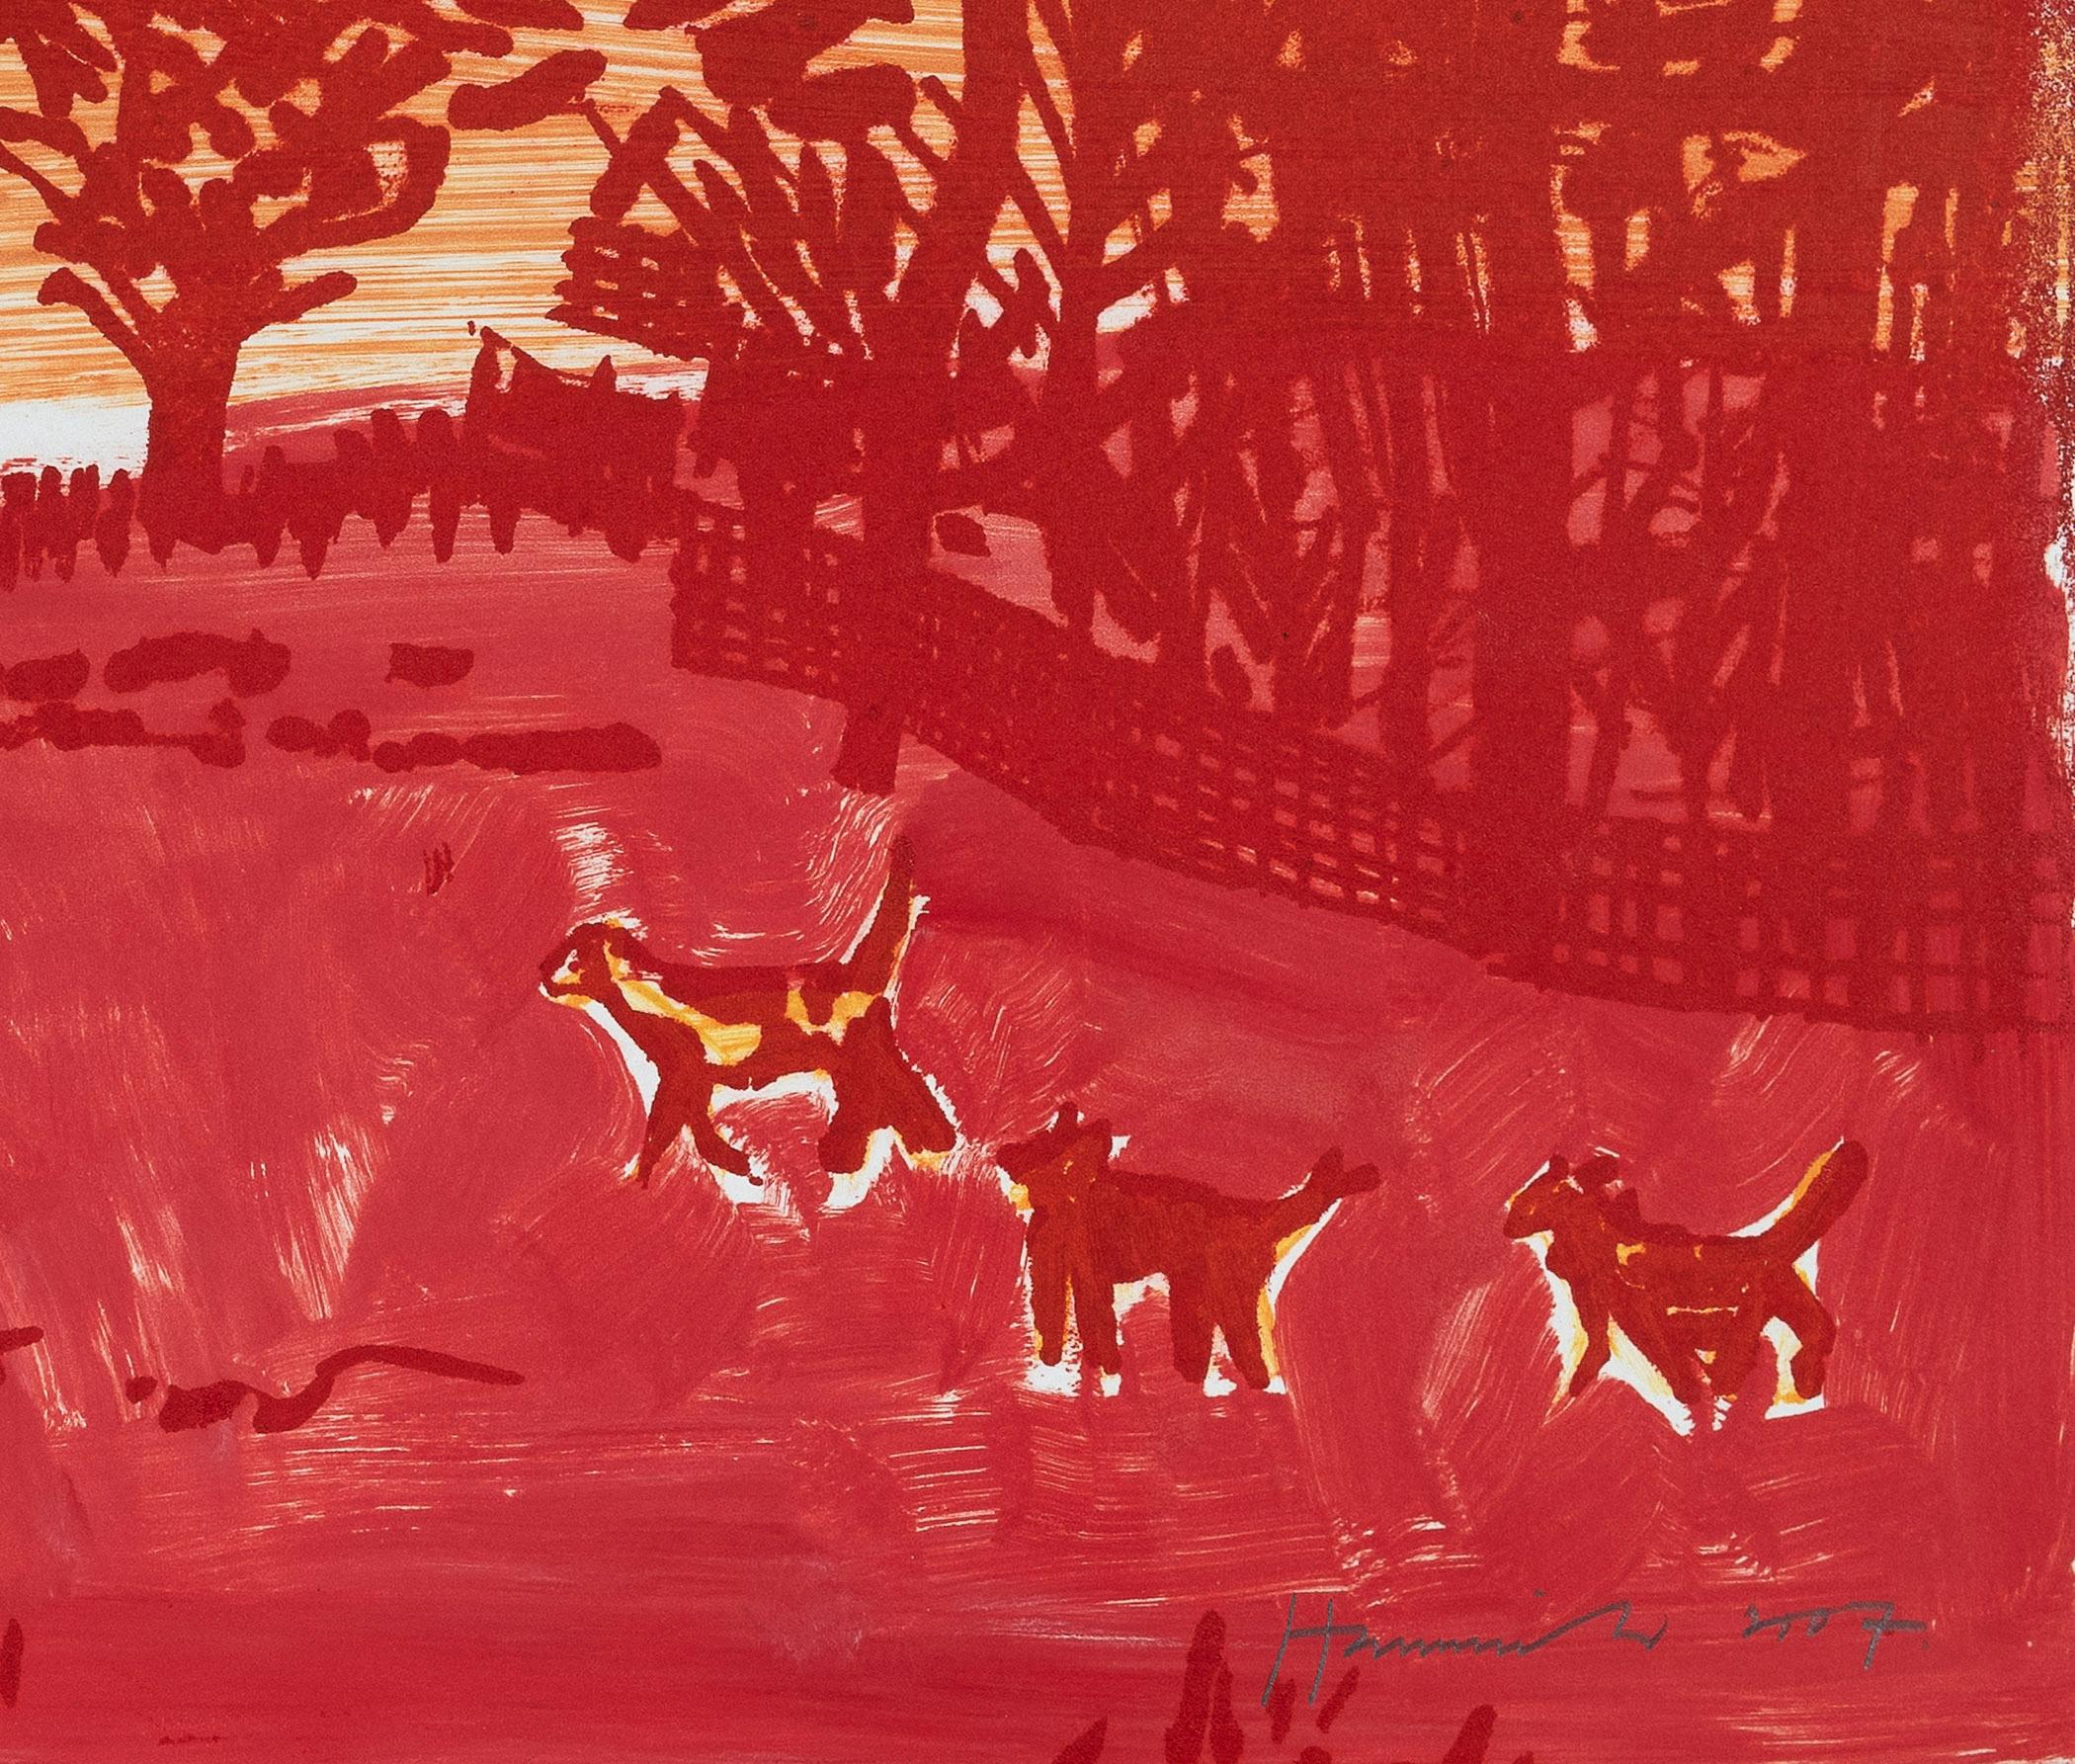 3 Dogs - Other Art Style Print by Tom Hammick